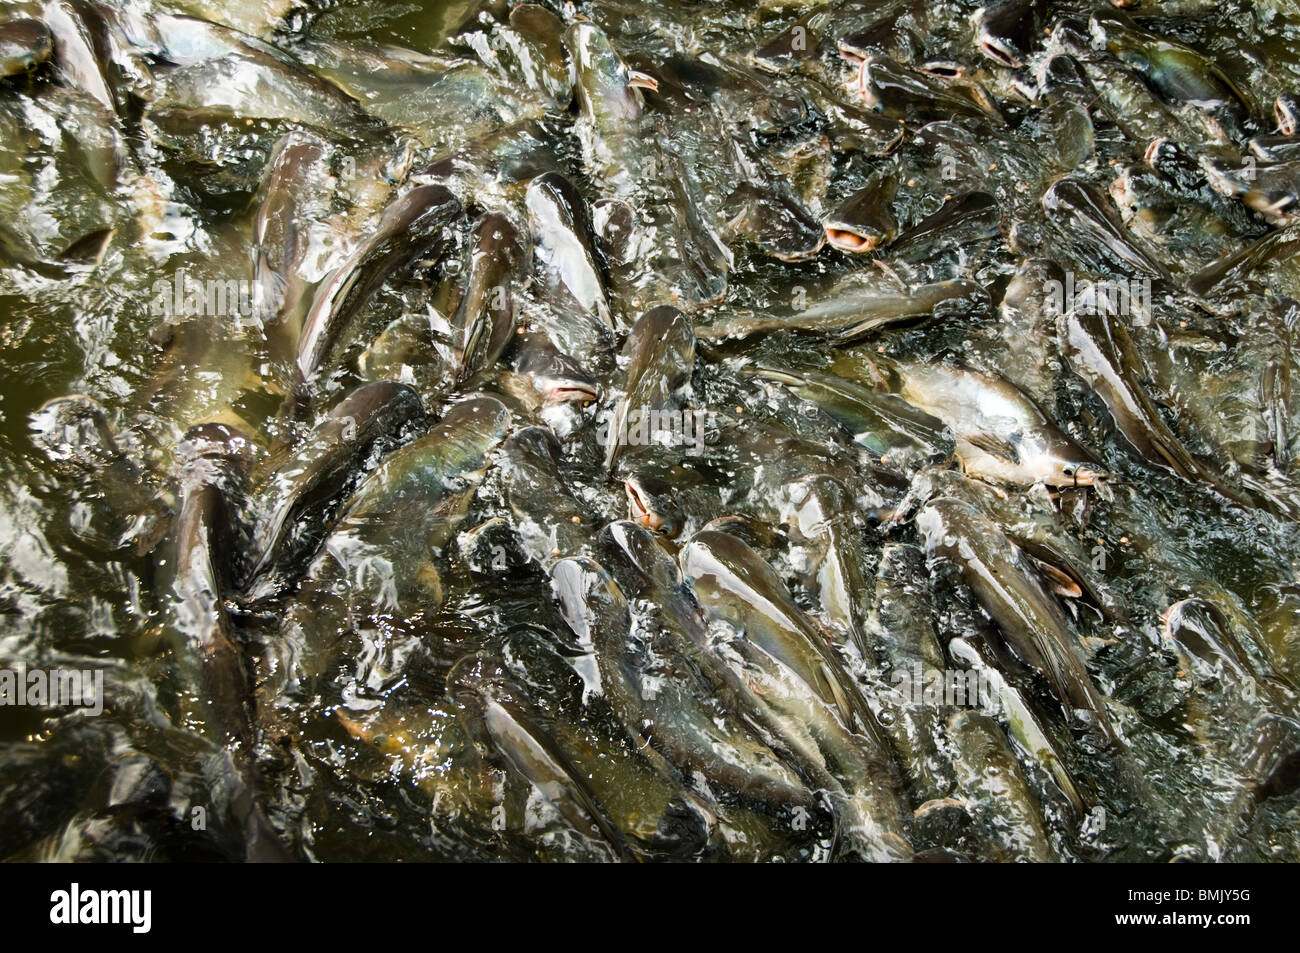 crowded catfish fighting for given food. Stock Photo